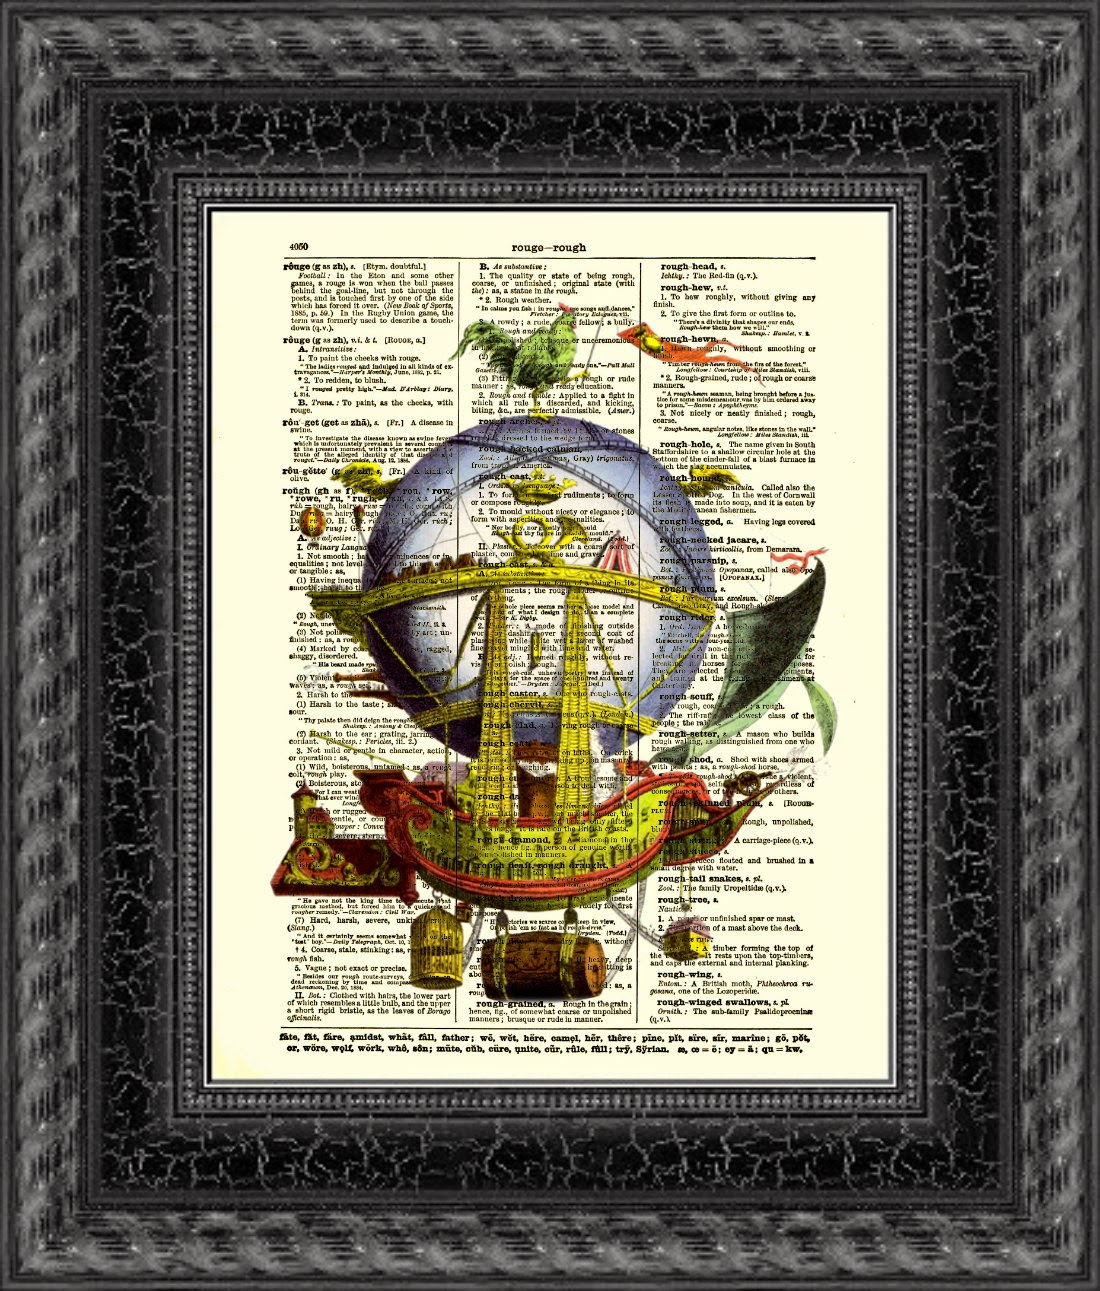 17-Upcycled-Hot-Air-Balloon-Belle-Old-Books-and-Dictionaries-in-Re-Imagination-Prints-www-designstack-co